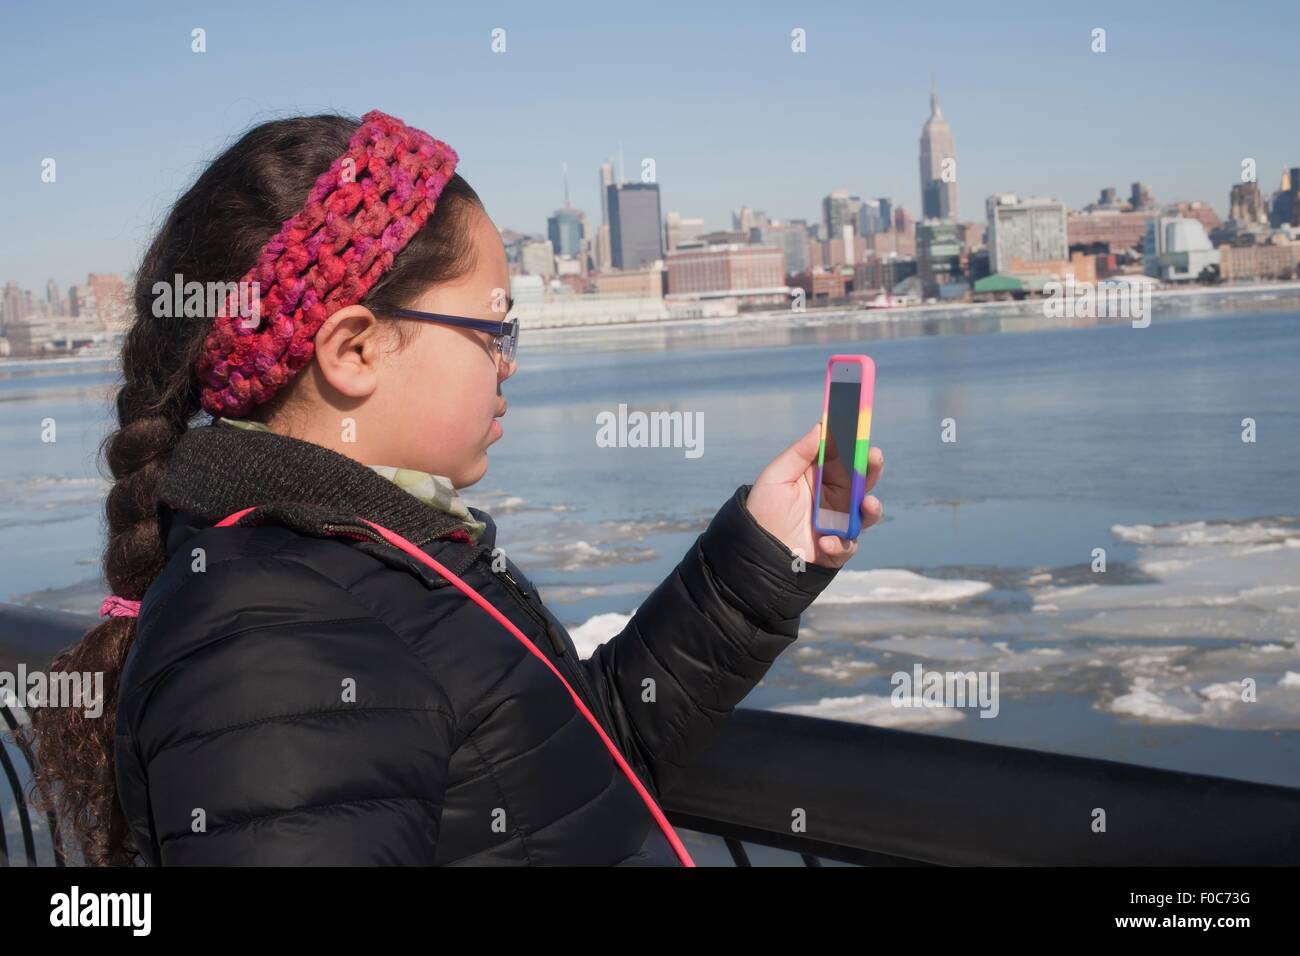 Young Girl taking photograph of skyline en utilisant smartphone, New York, NY, USA Banque D'Images